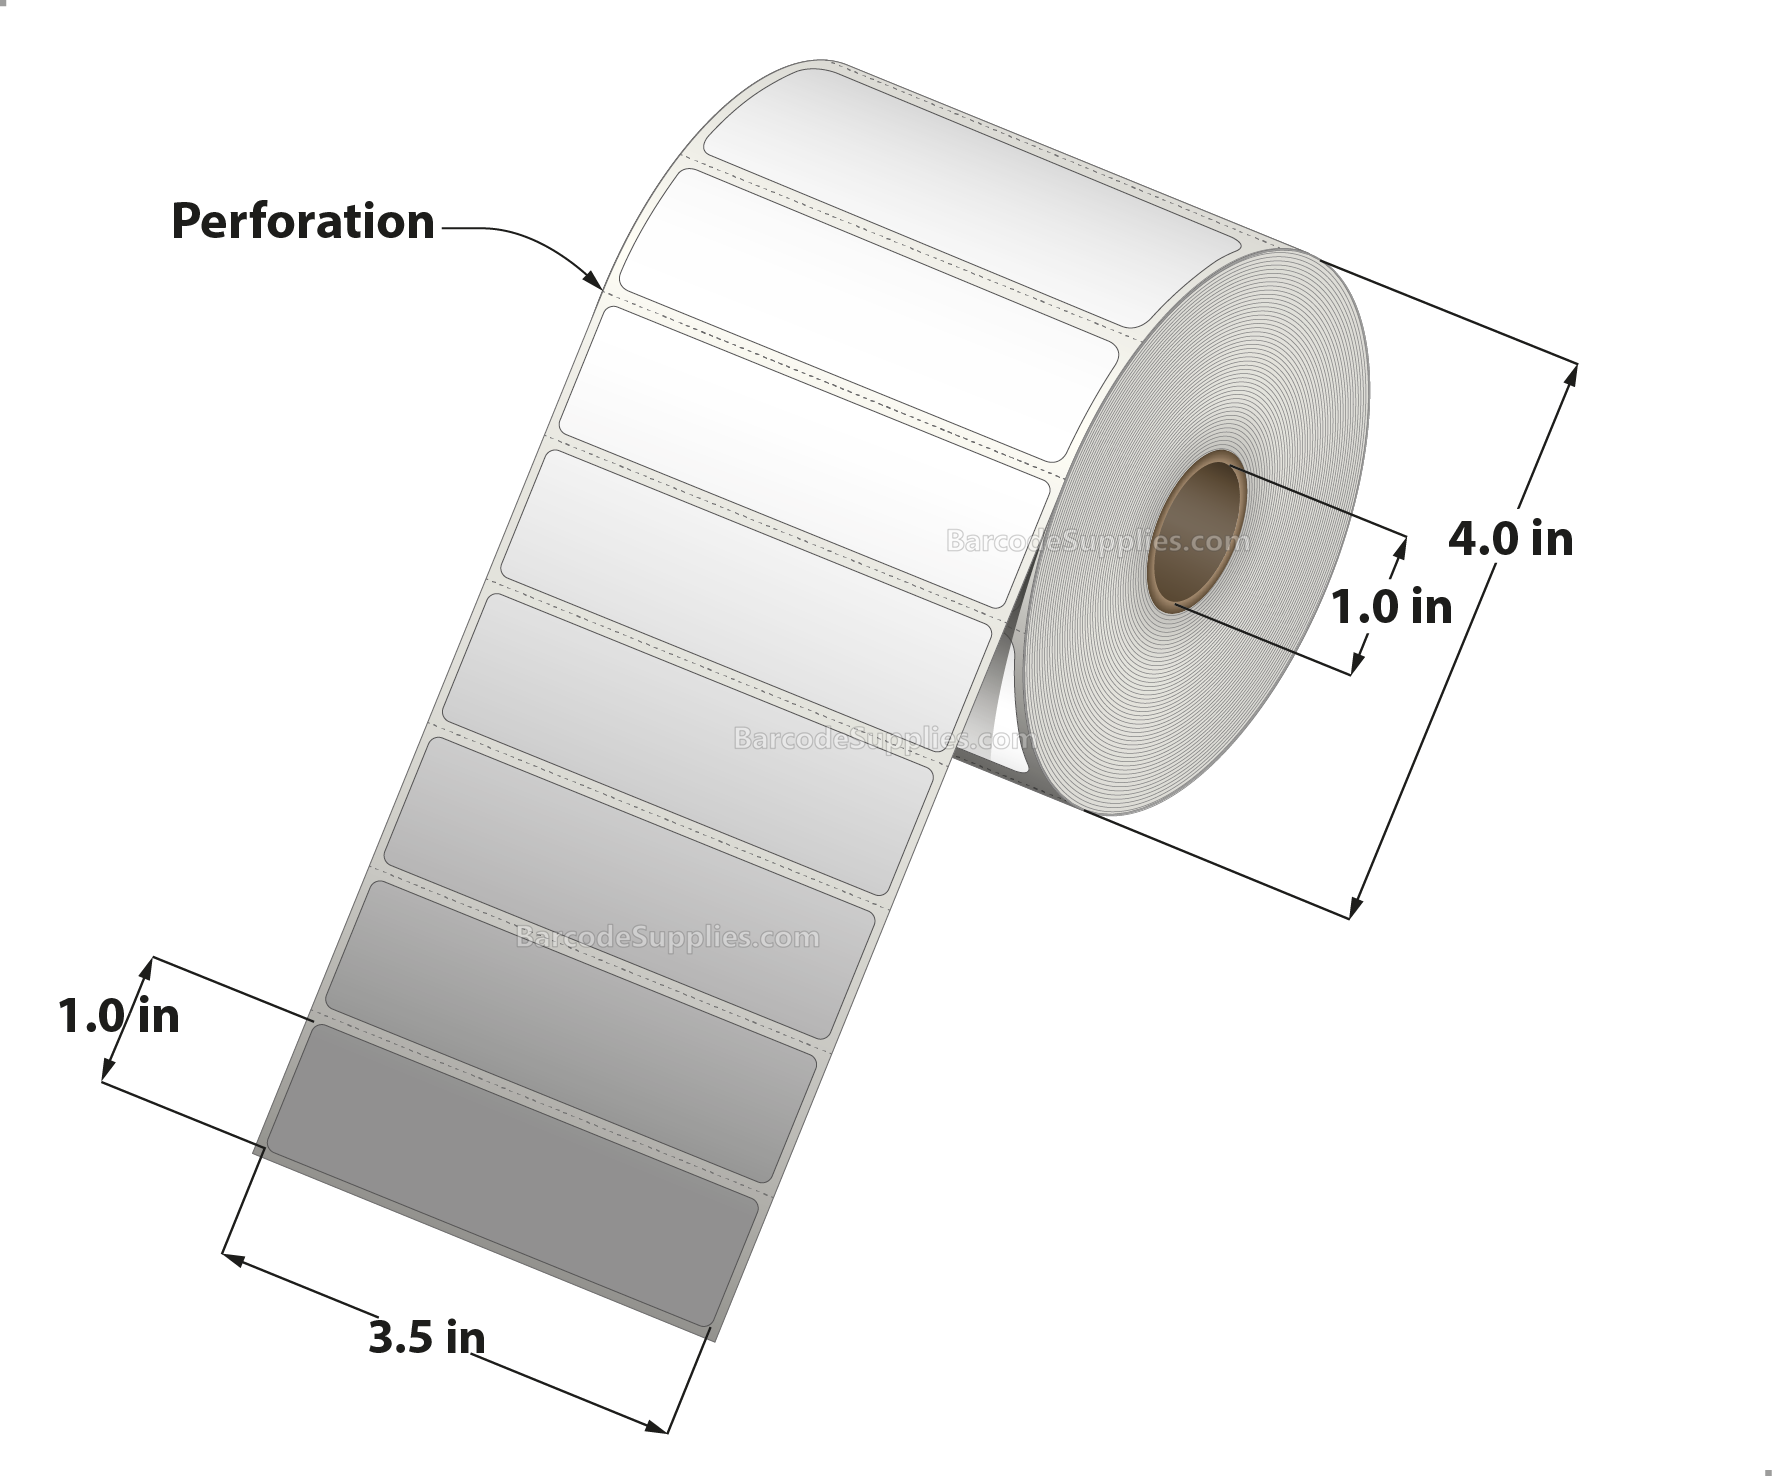 Products 3.50 x 1 Direct Thermal White Labels With Permanent Acrylic Adhesive - Perforated - 1310 Labels Per Roll - Carton Of 4 Rolls - 5240 Labels Total - MPN: DT351-14PDT